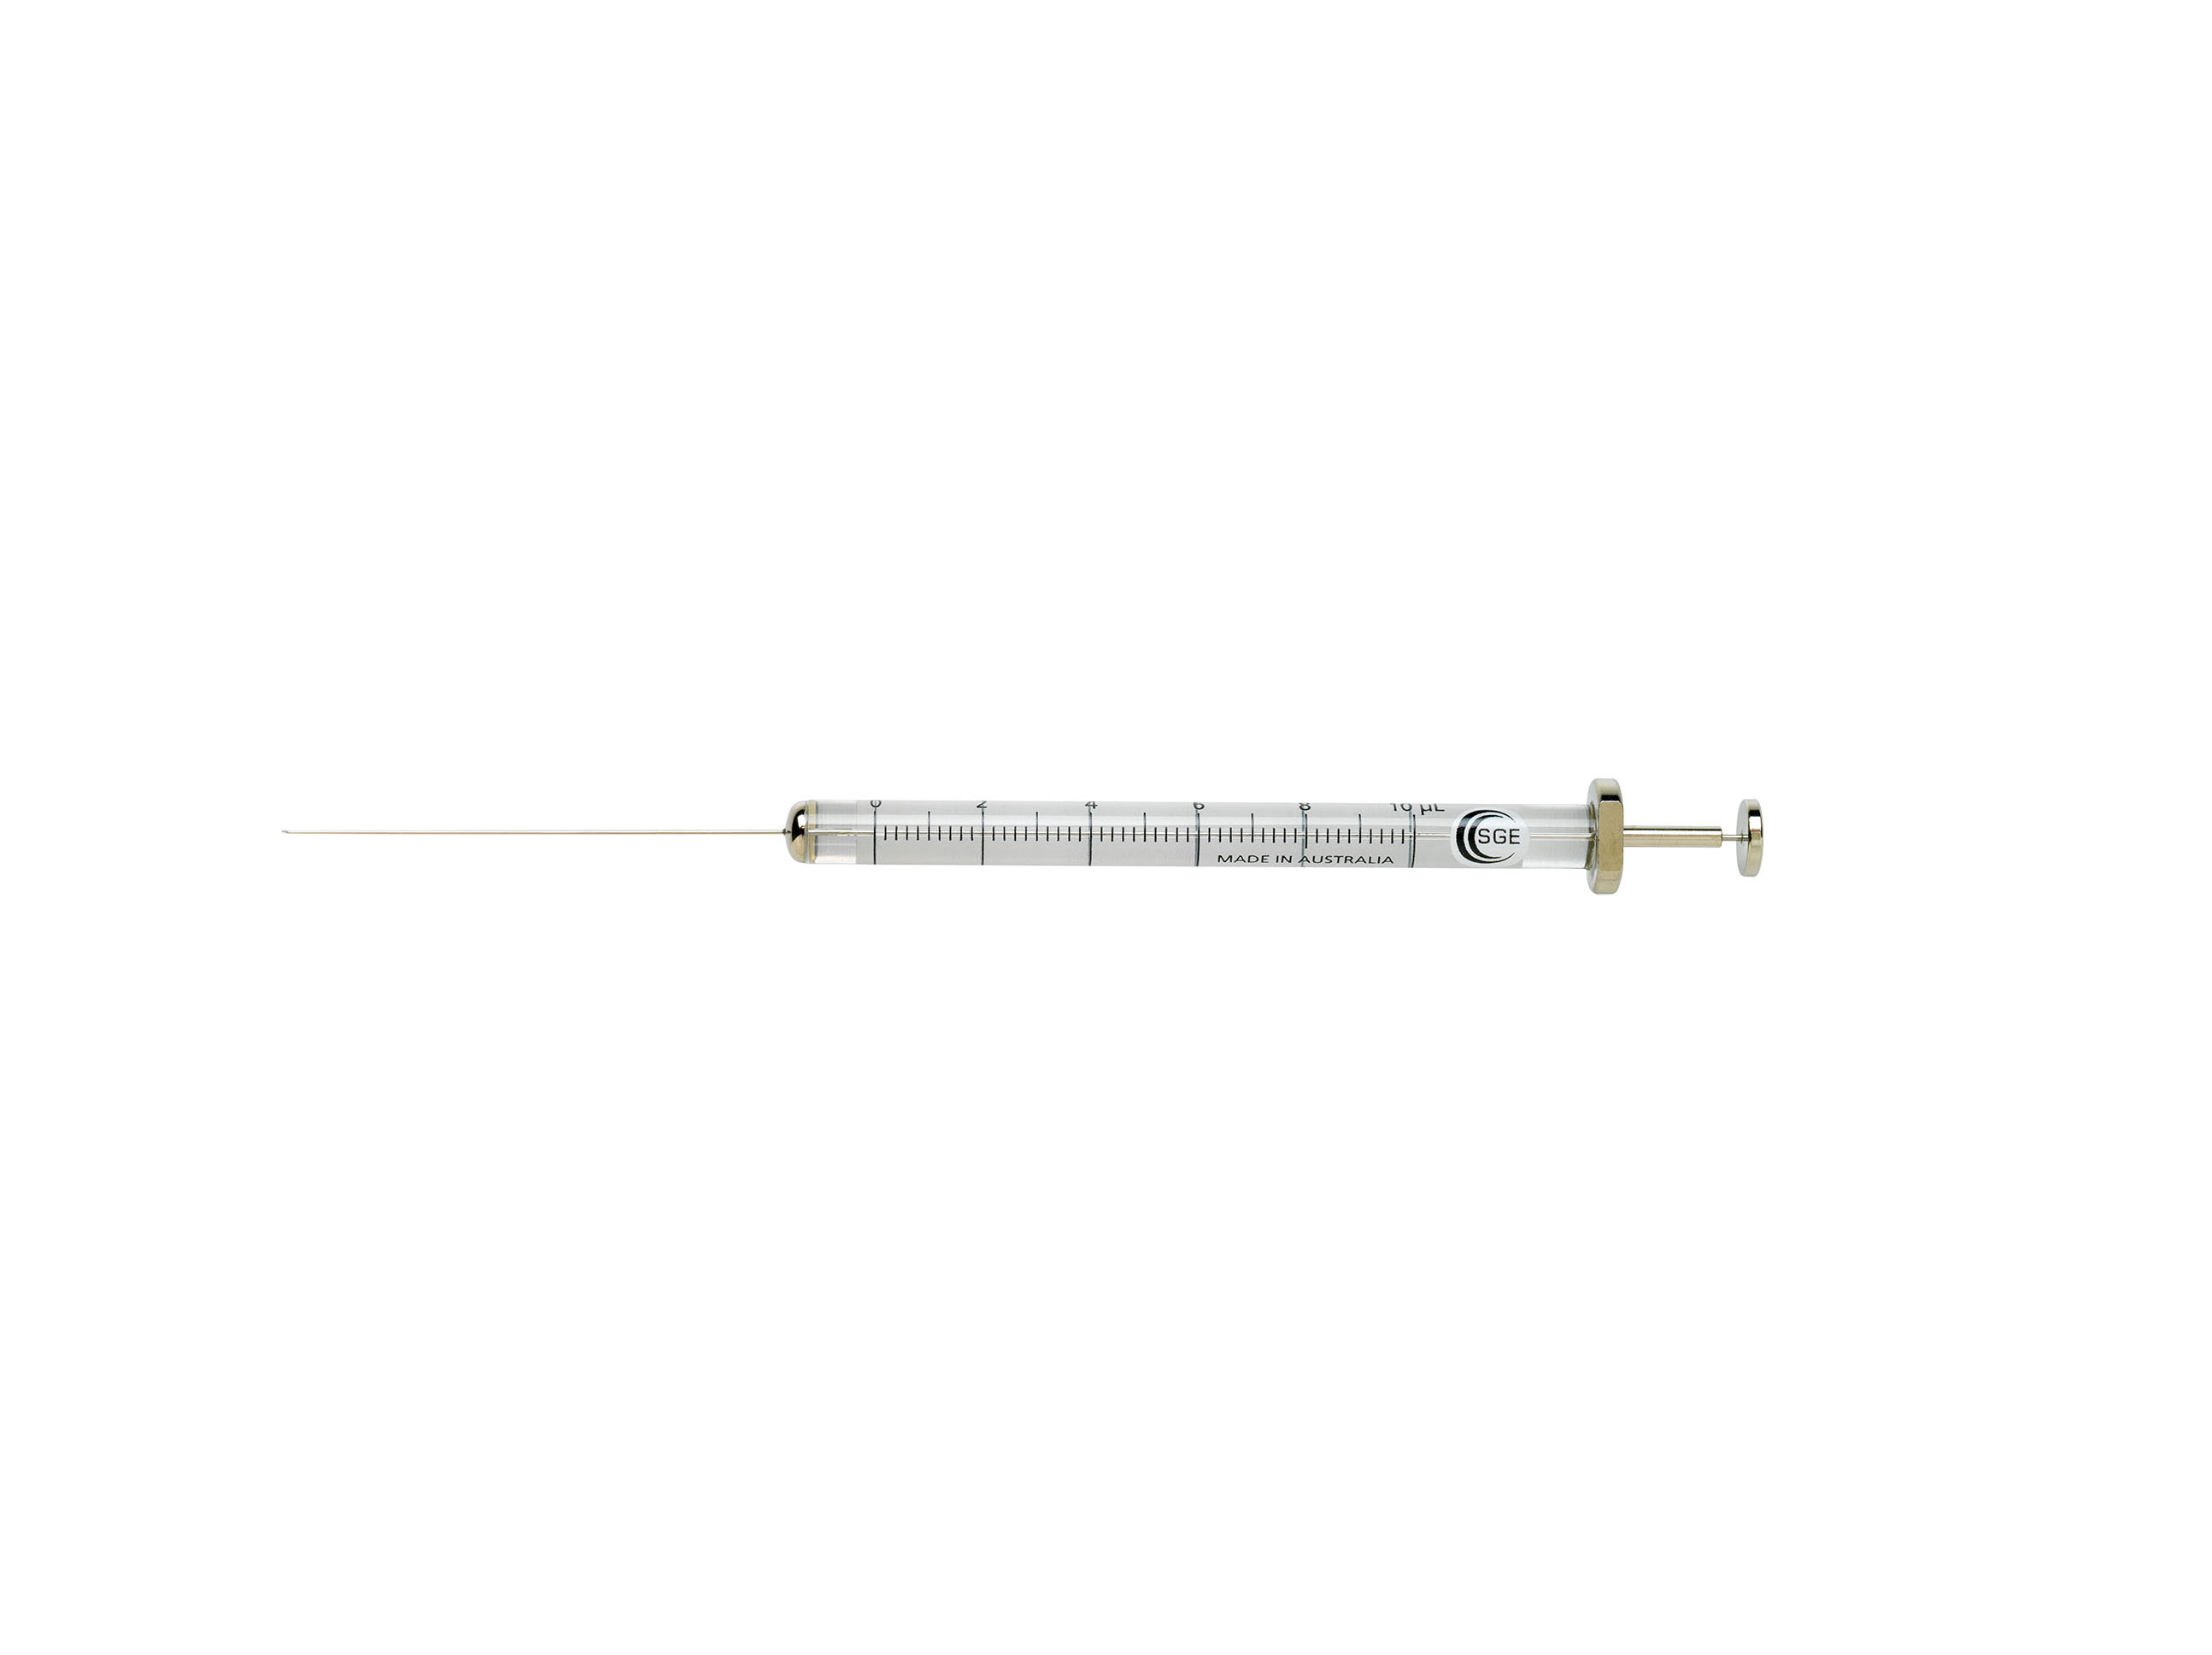 Manual syringes from 5 to 10µl